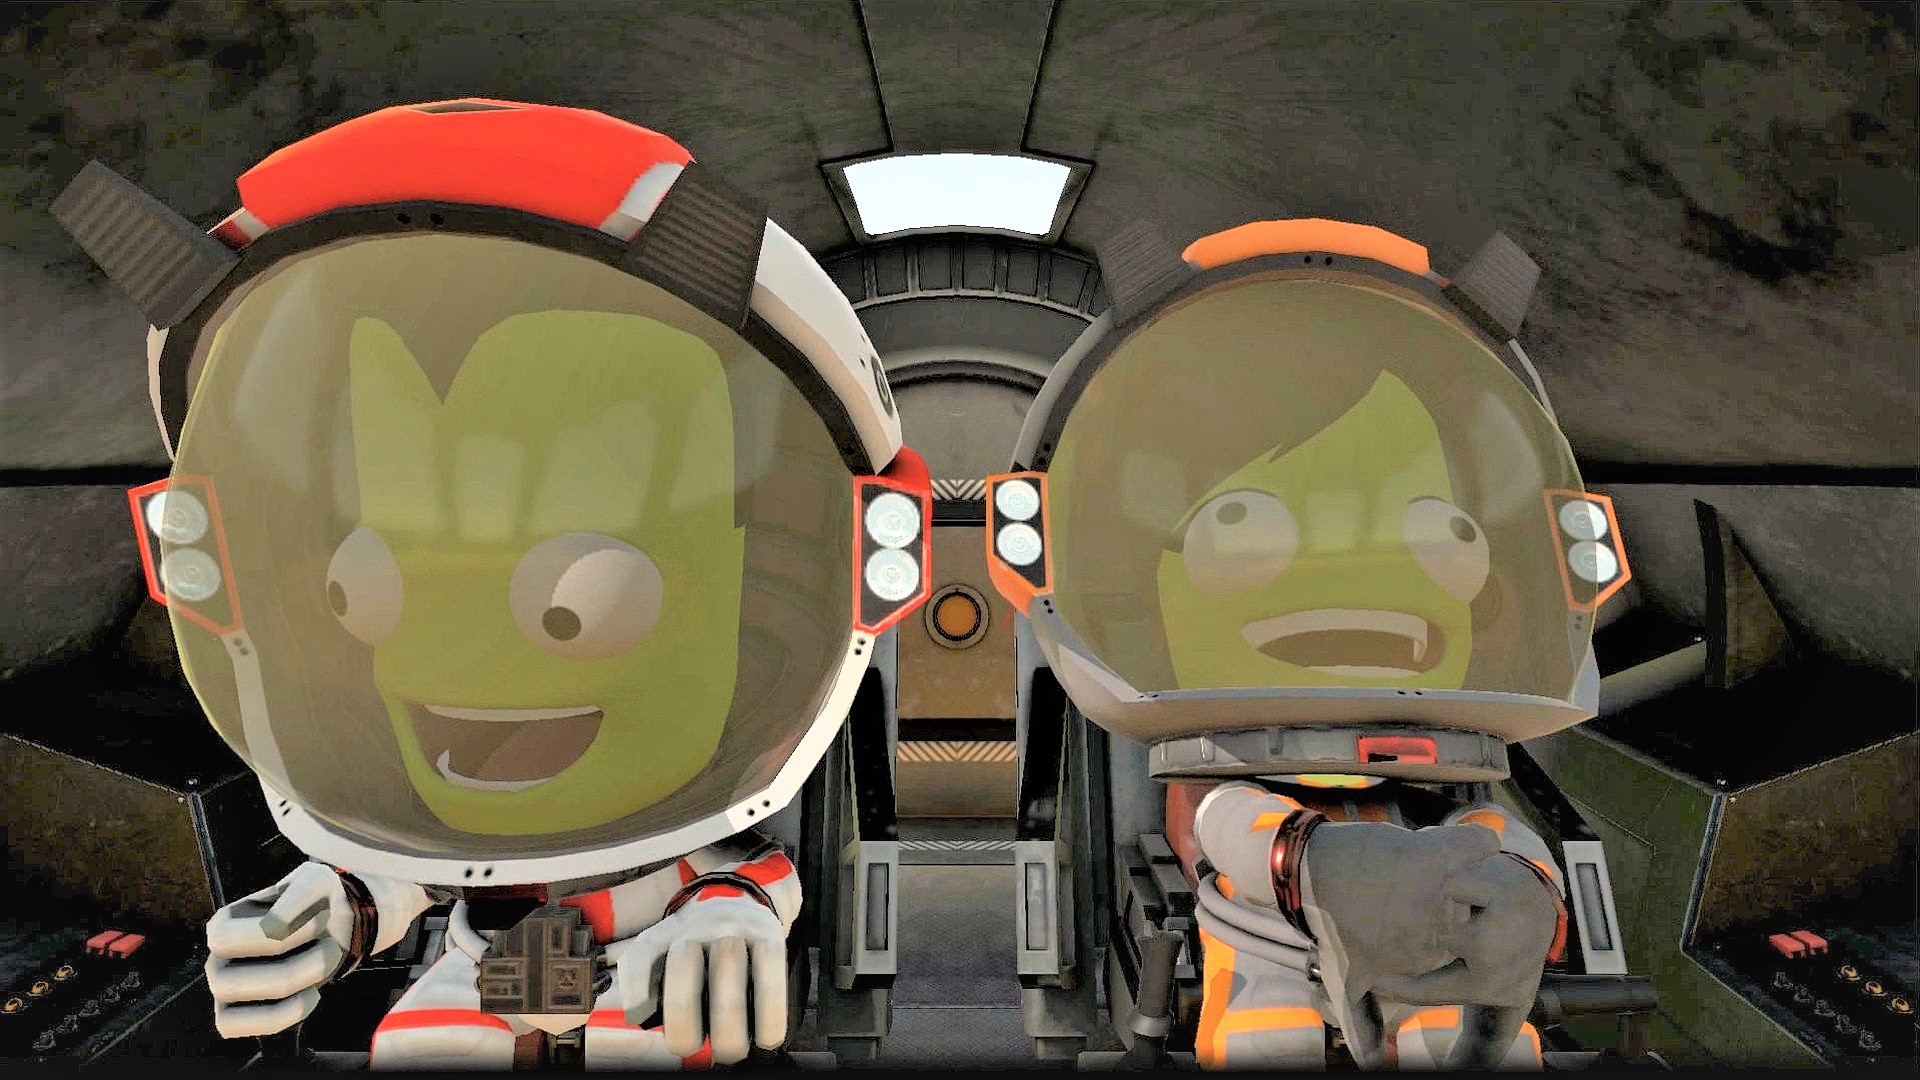 Kerbal Space Program 2 release date rumour, new planets, and more